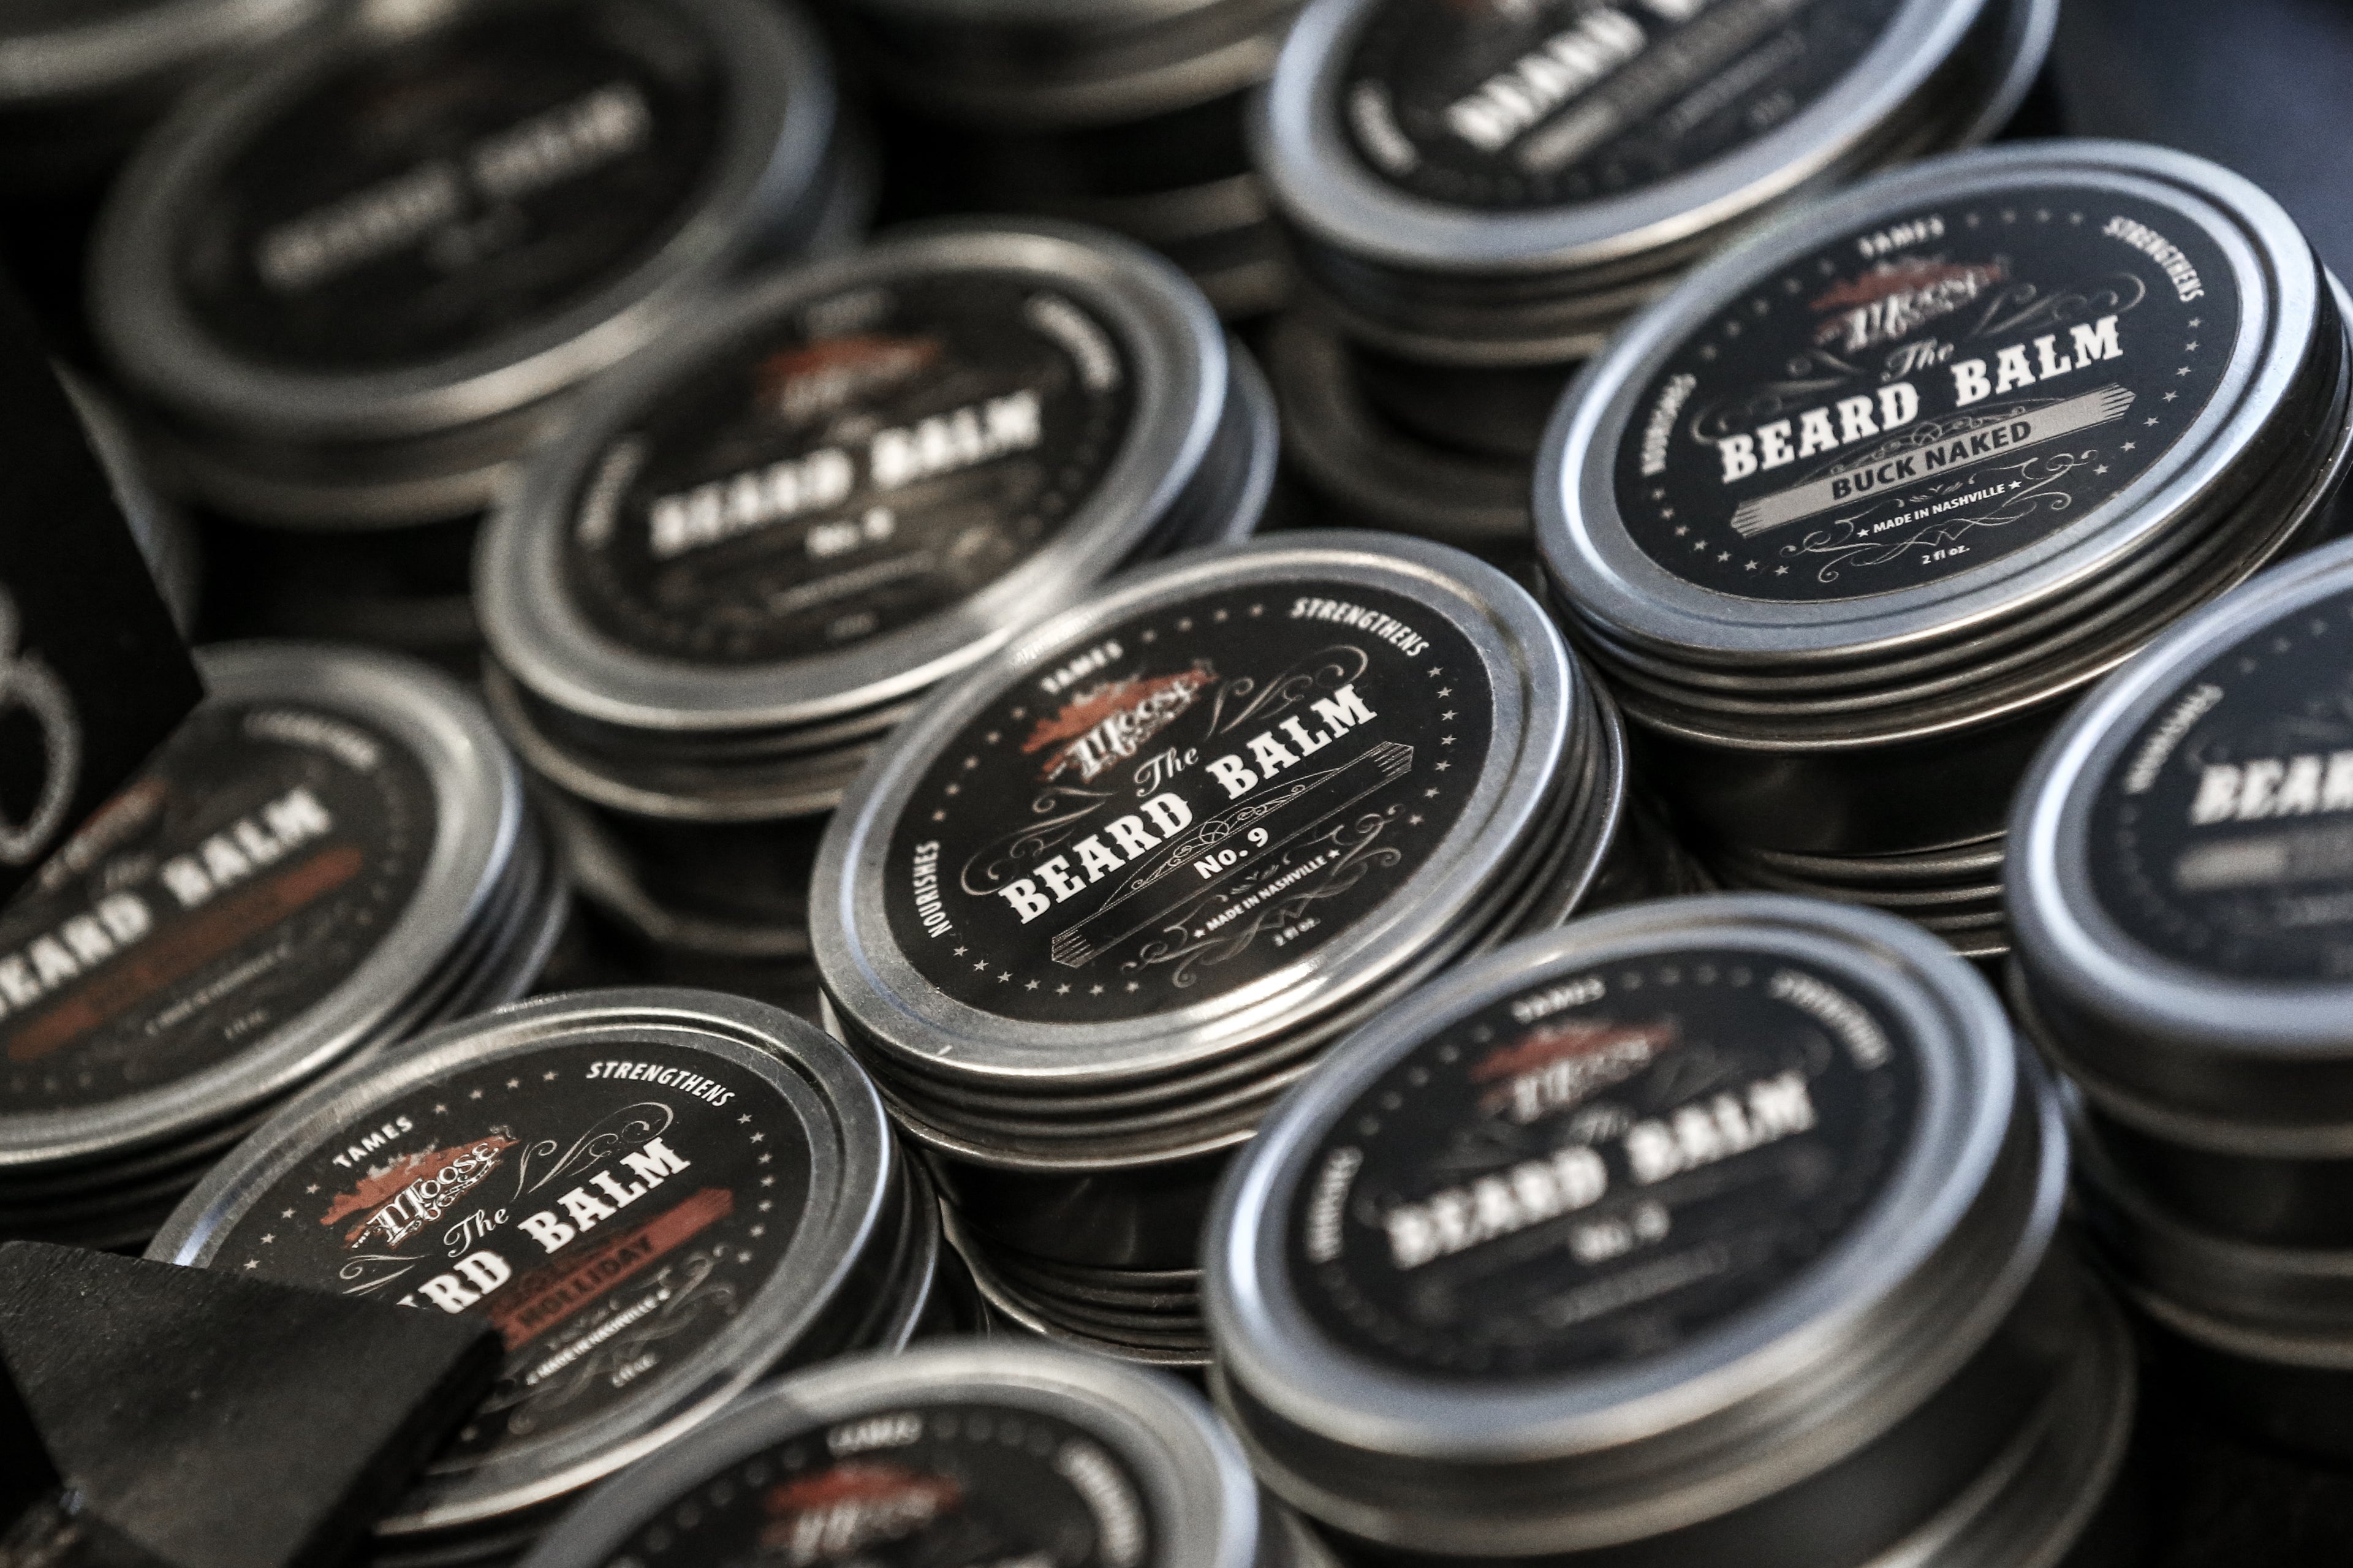 Stacked cans of The Moose Beard Palm Men's Grooming Product